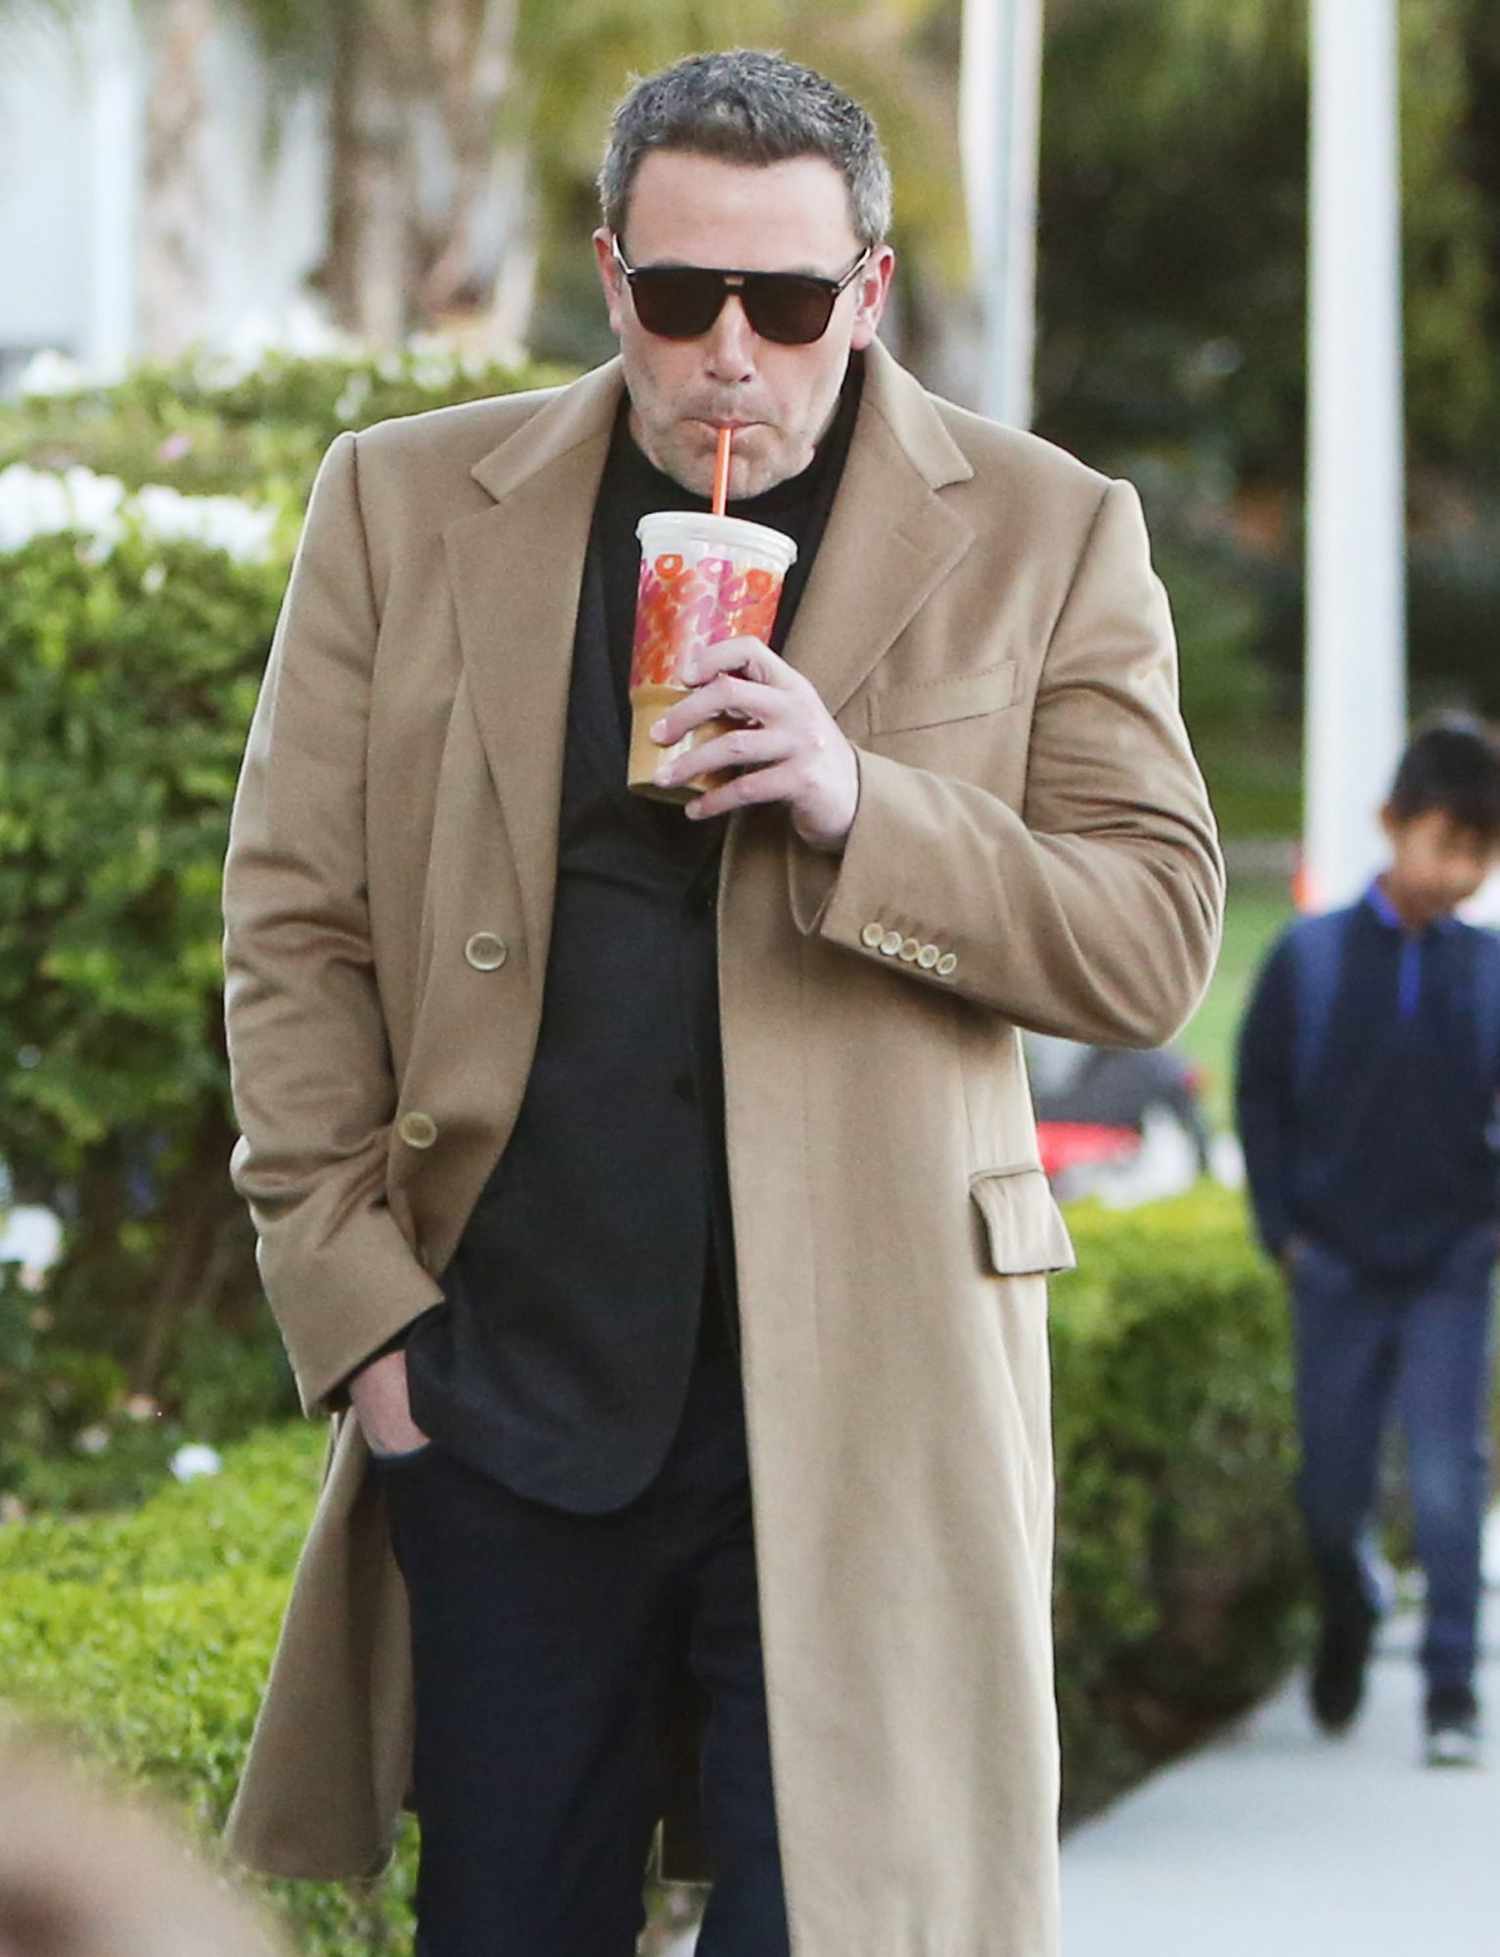 Ben Affleck is seen on March 14, 2019 in Los Angeles, California